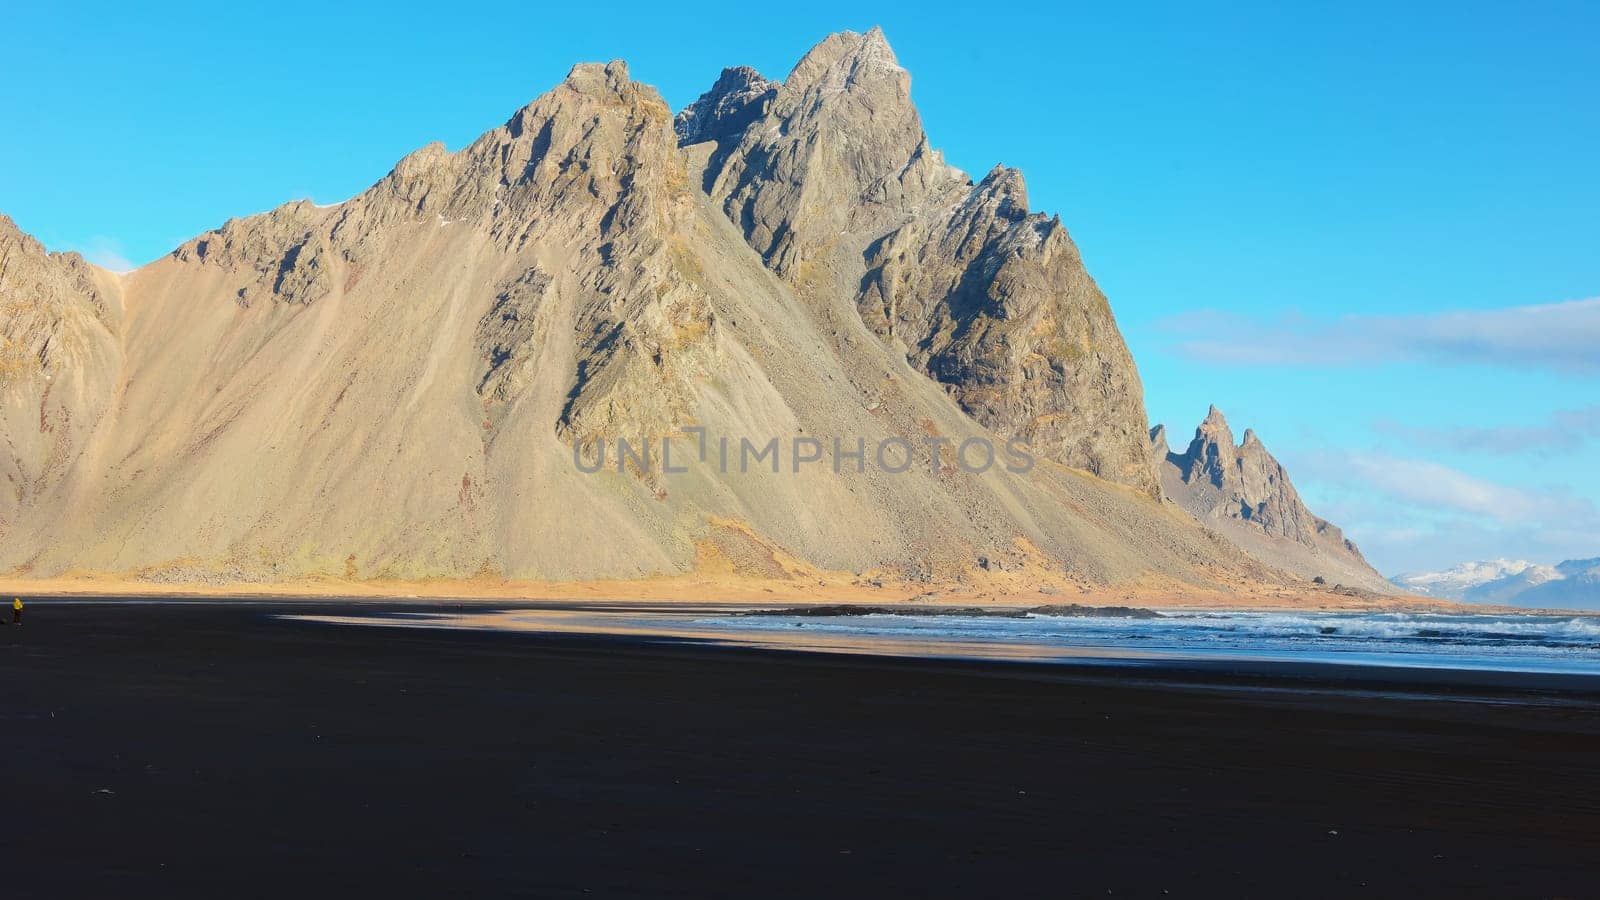 Vestrahorn mountains on arctic peninsula with natural black sand beach and beautiful skyline, sightseeing adventure. Ocean coastline shore and hills forming majestic landscape. Handheld shot.